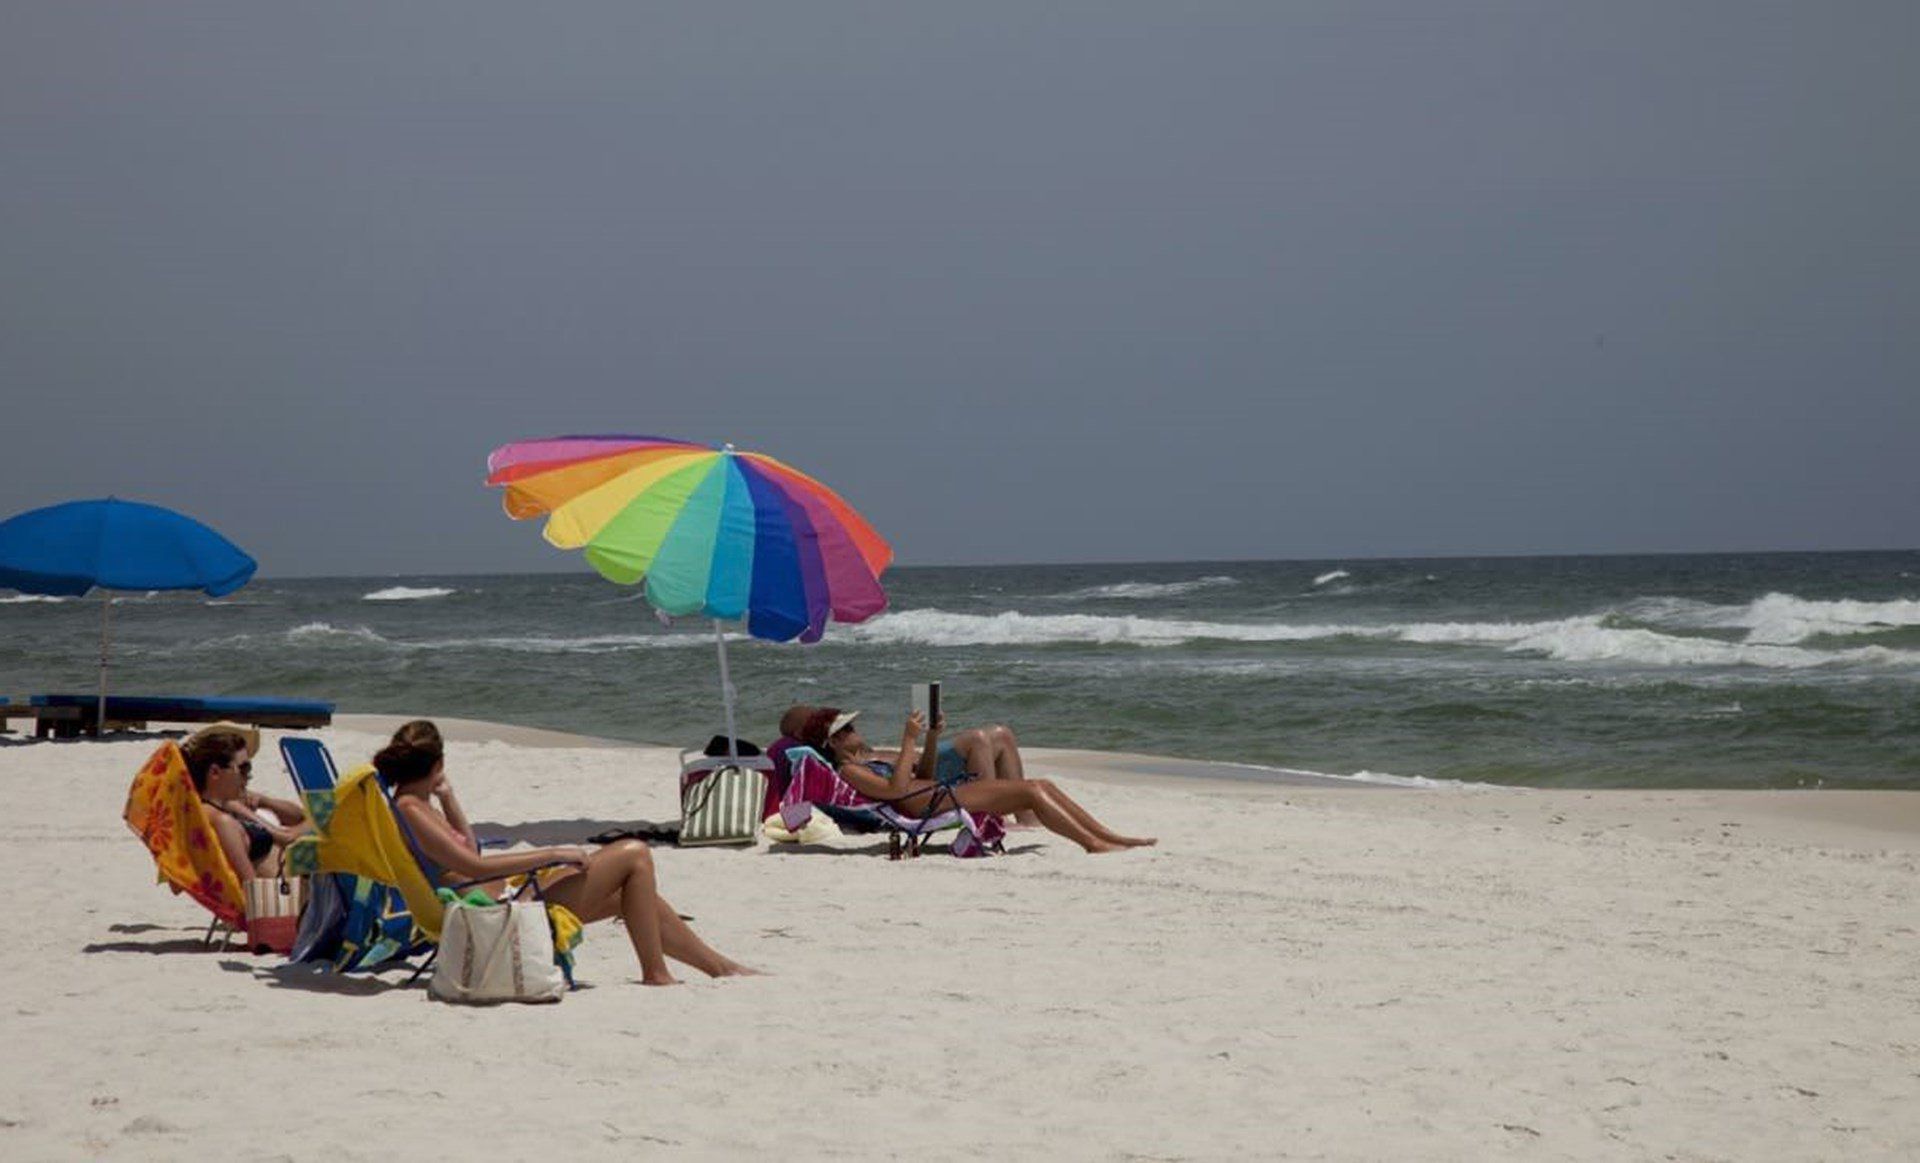 This Memorial Day, Lawmakers Seek To Protect Americans From Beach With Regard To Well Liked Julian Beach Umbrellas (View 18 of 20)